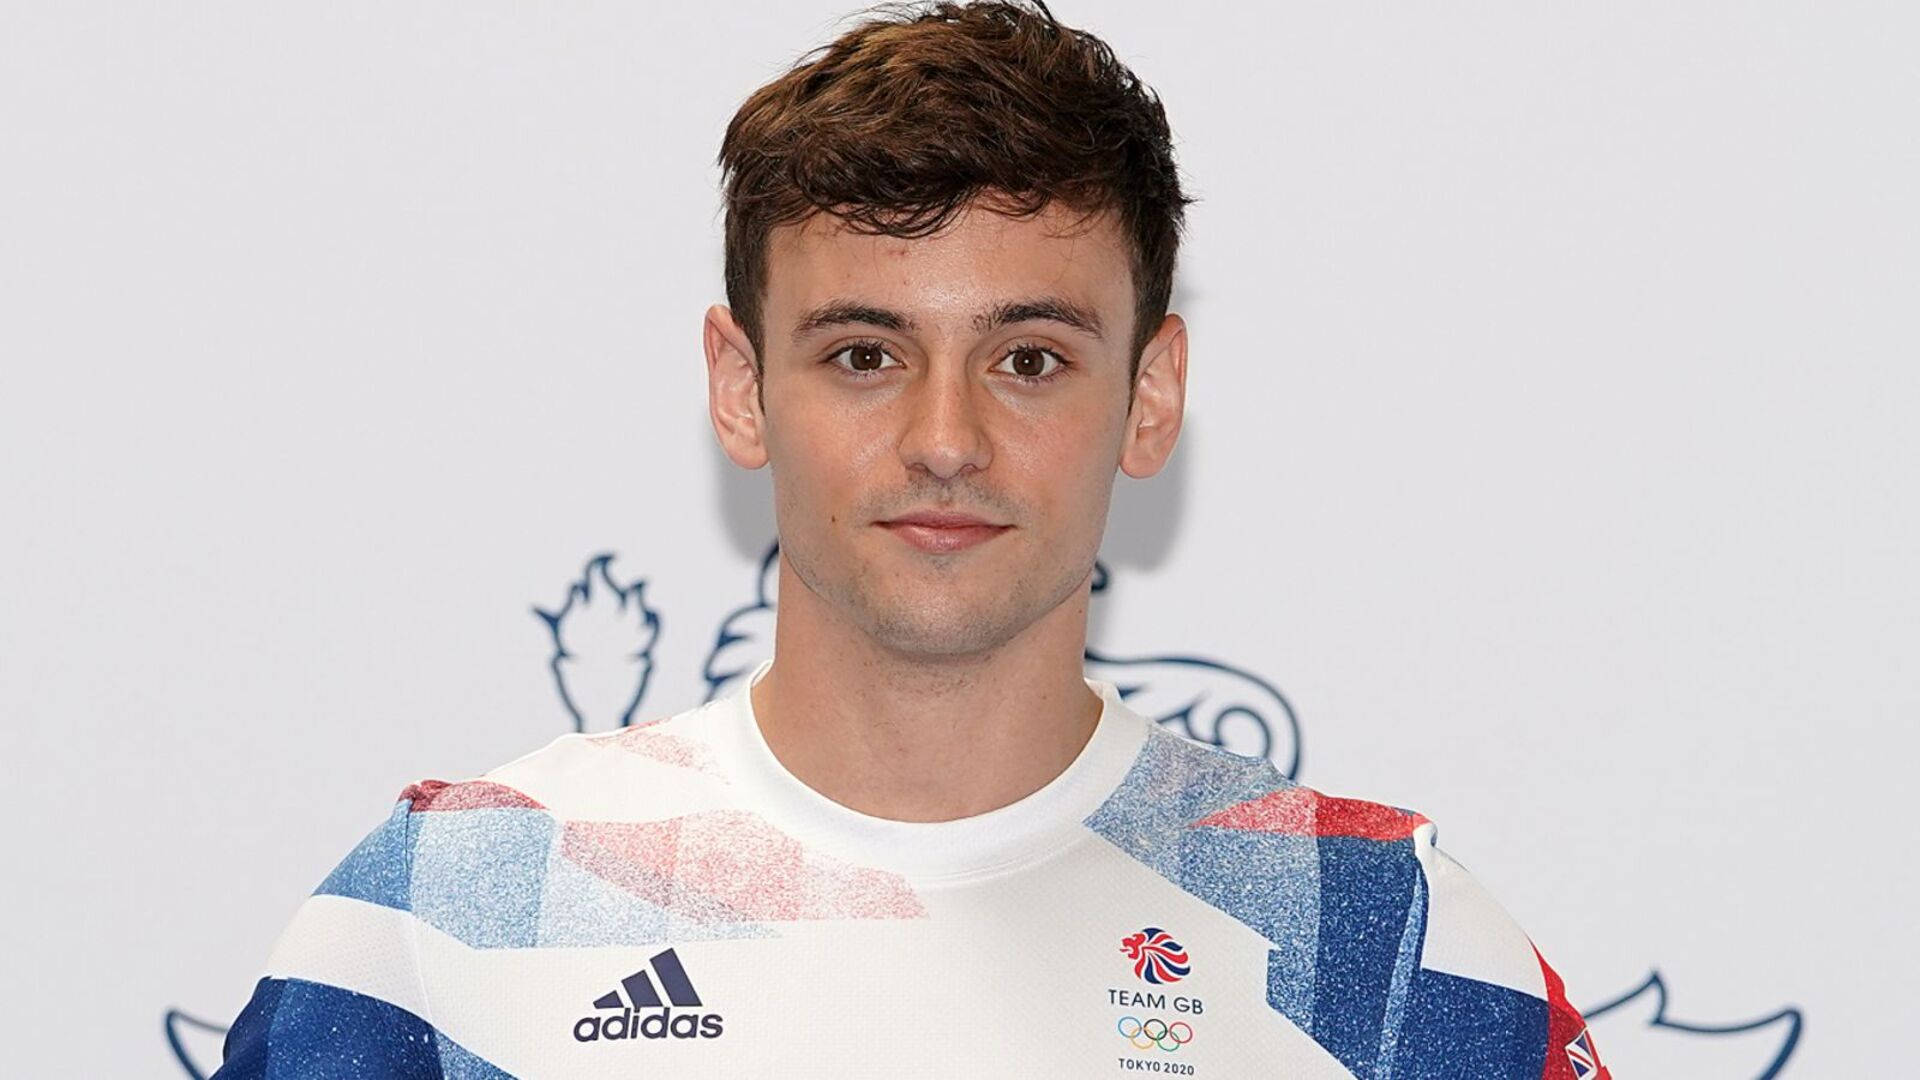 Olympian Diver Tom Daley Background